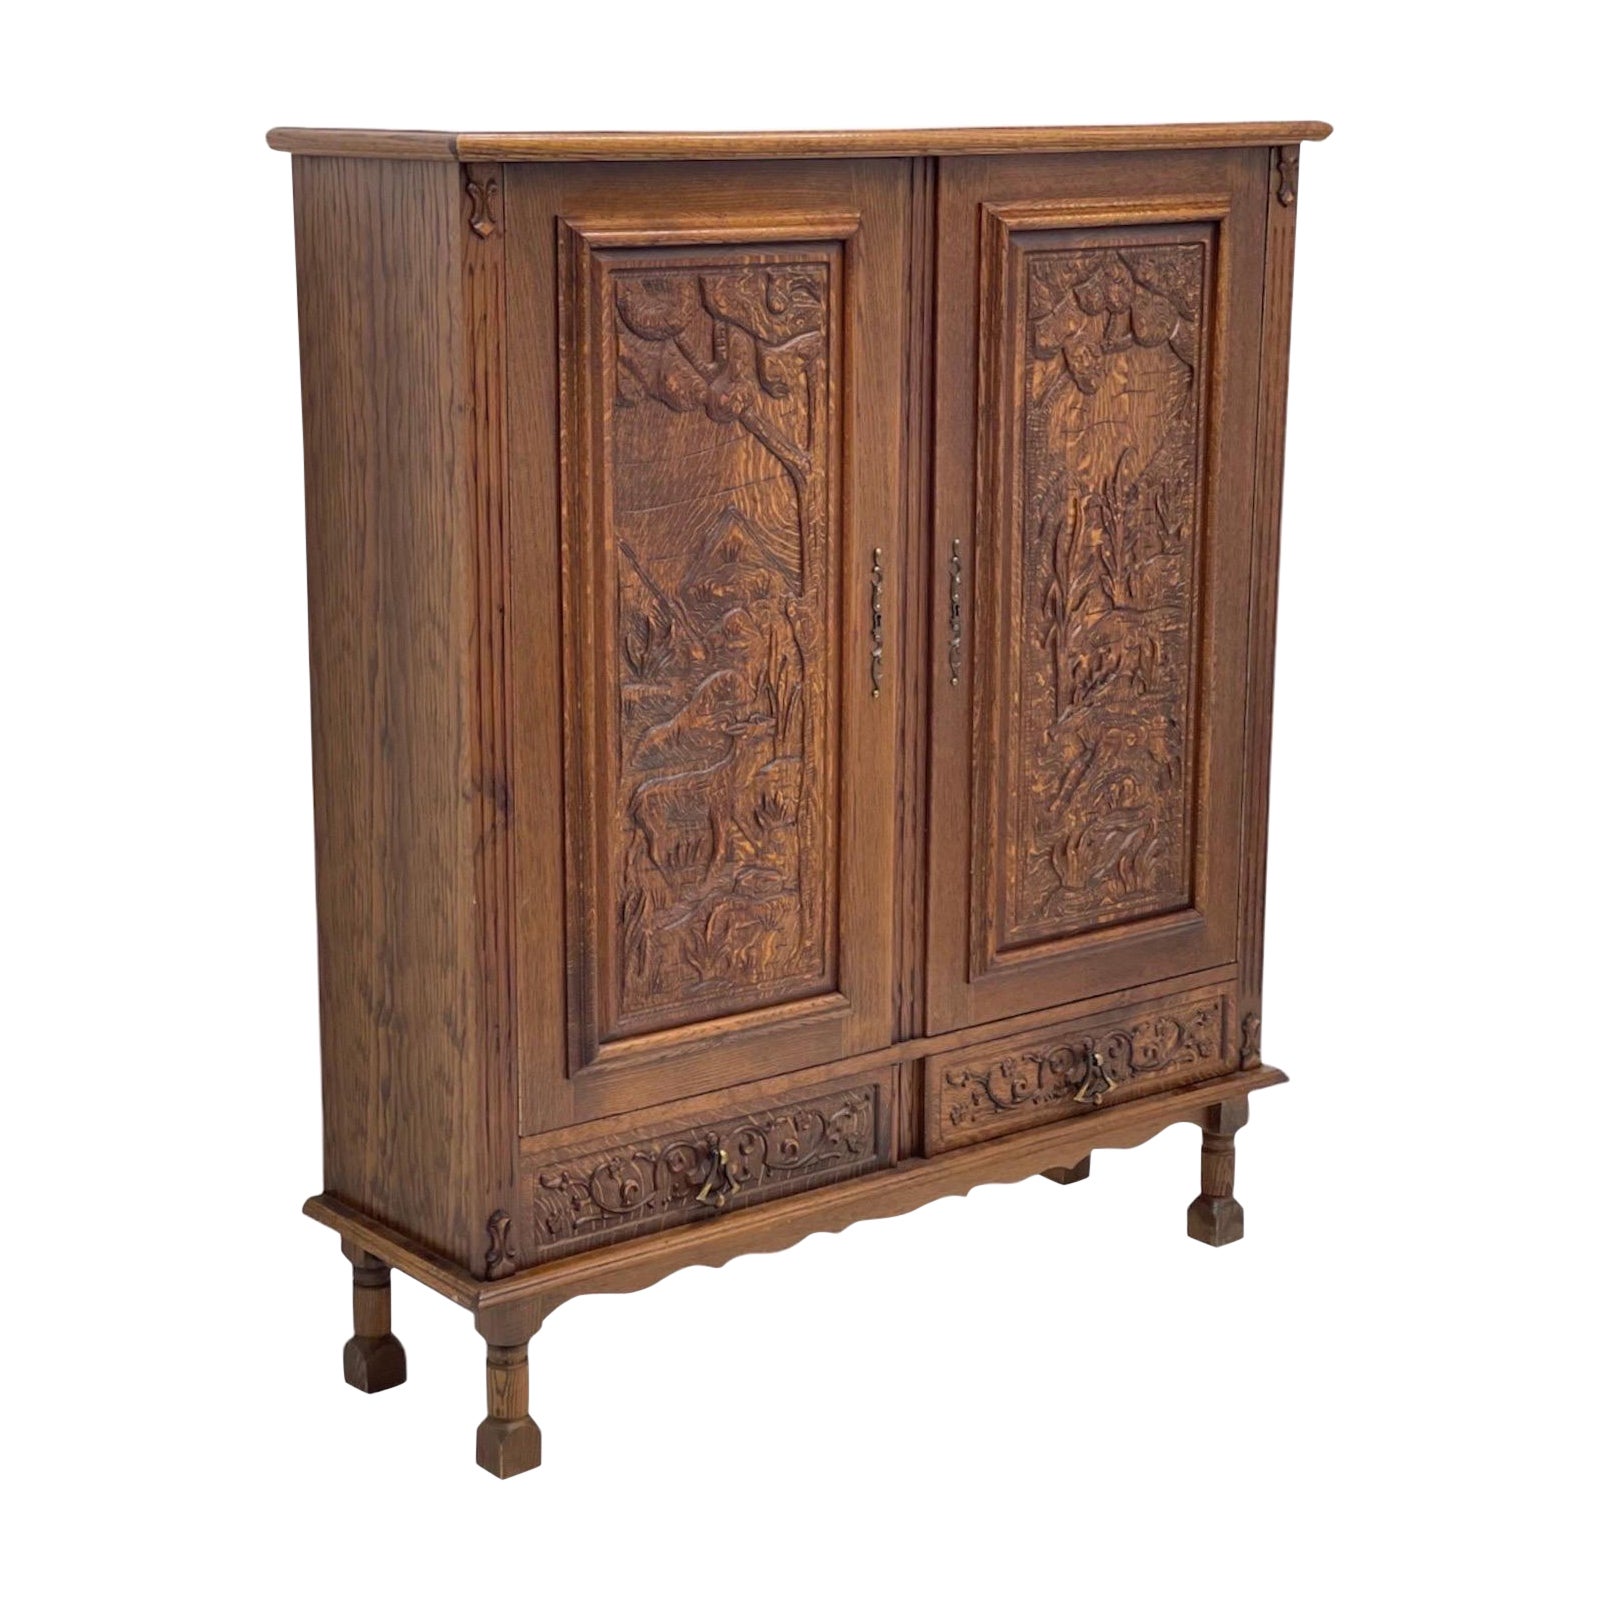 Vintage Cabinet from Germany with Hand Carved Motifs, circa 1930s